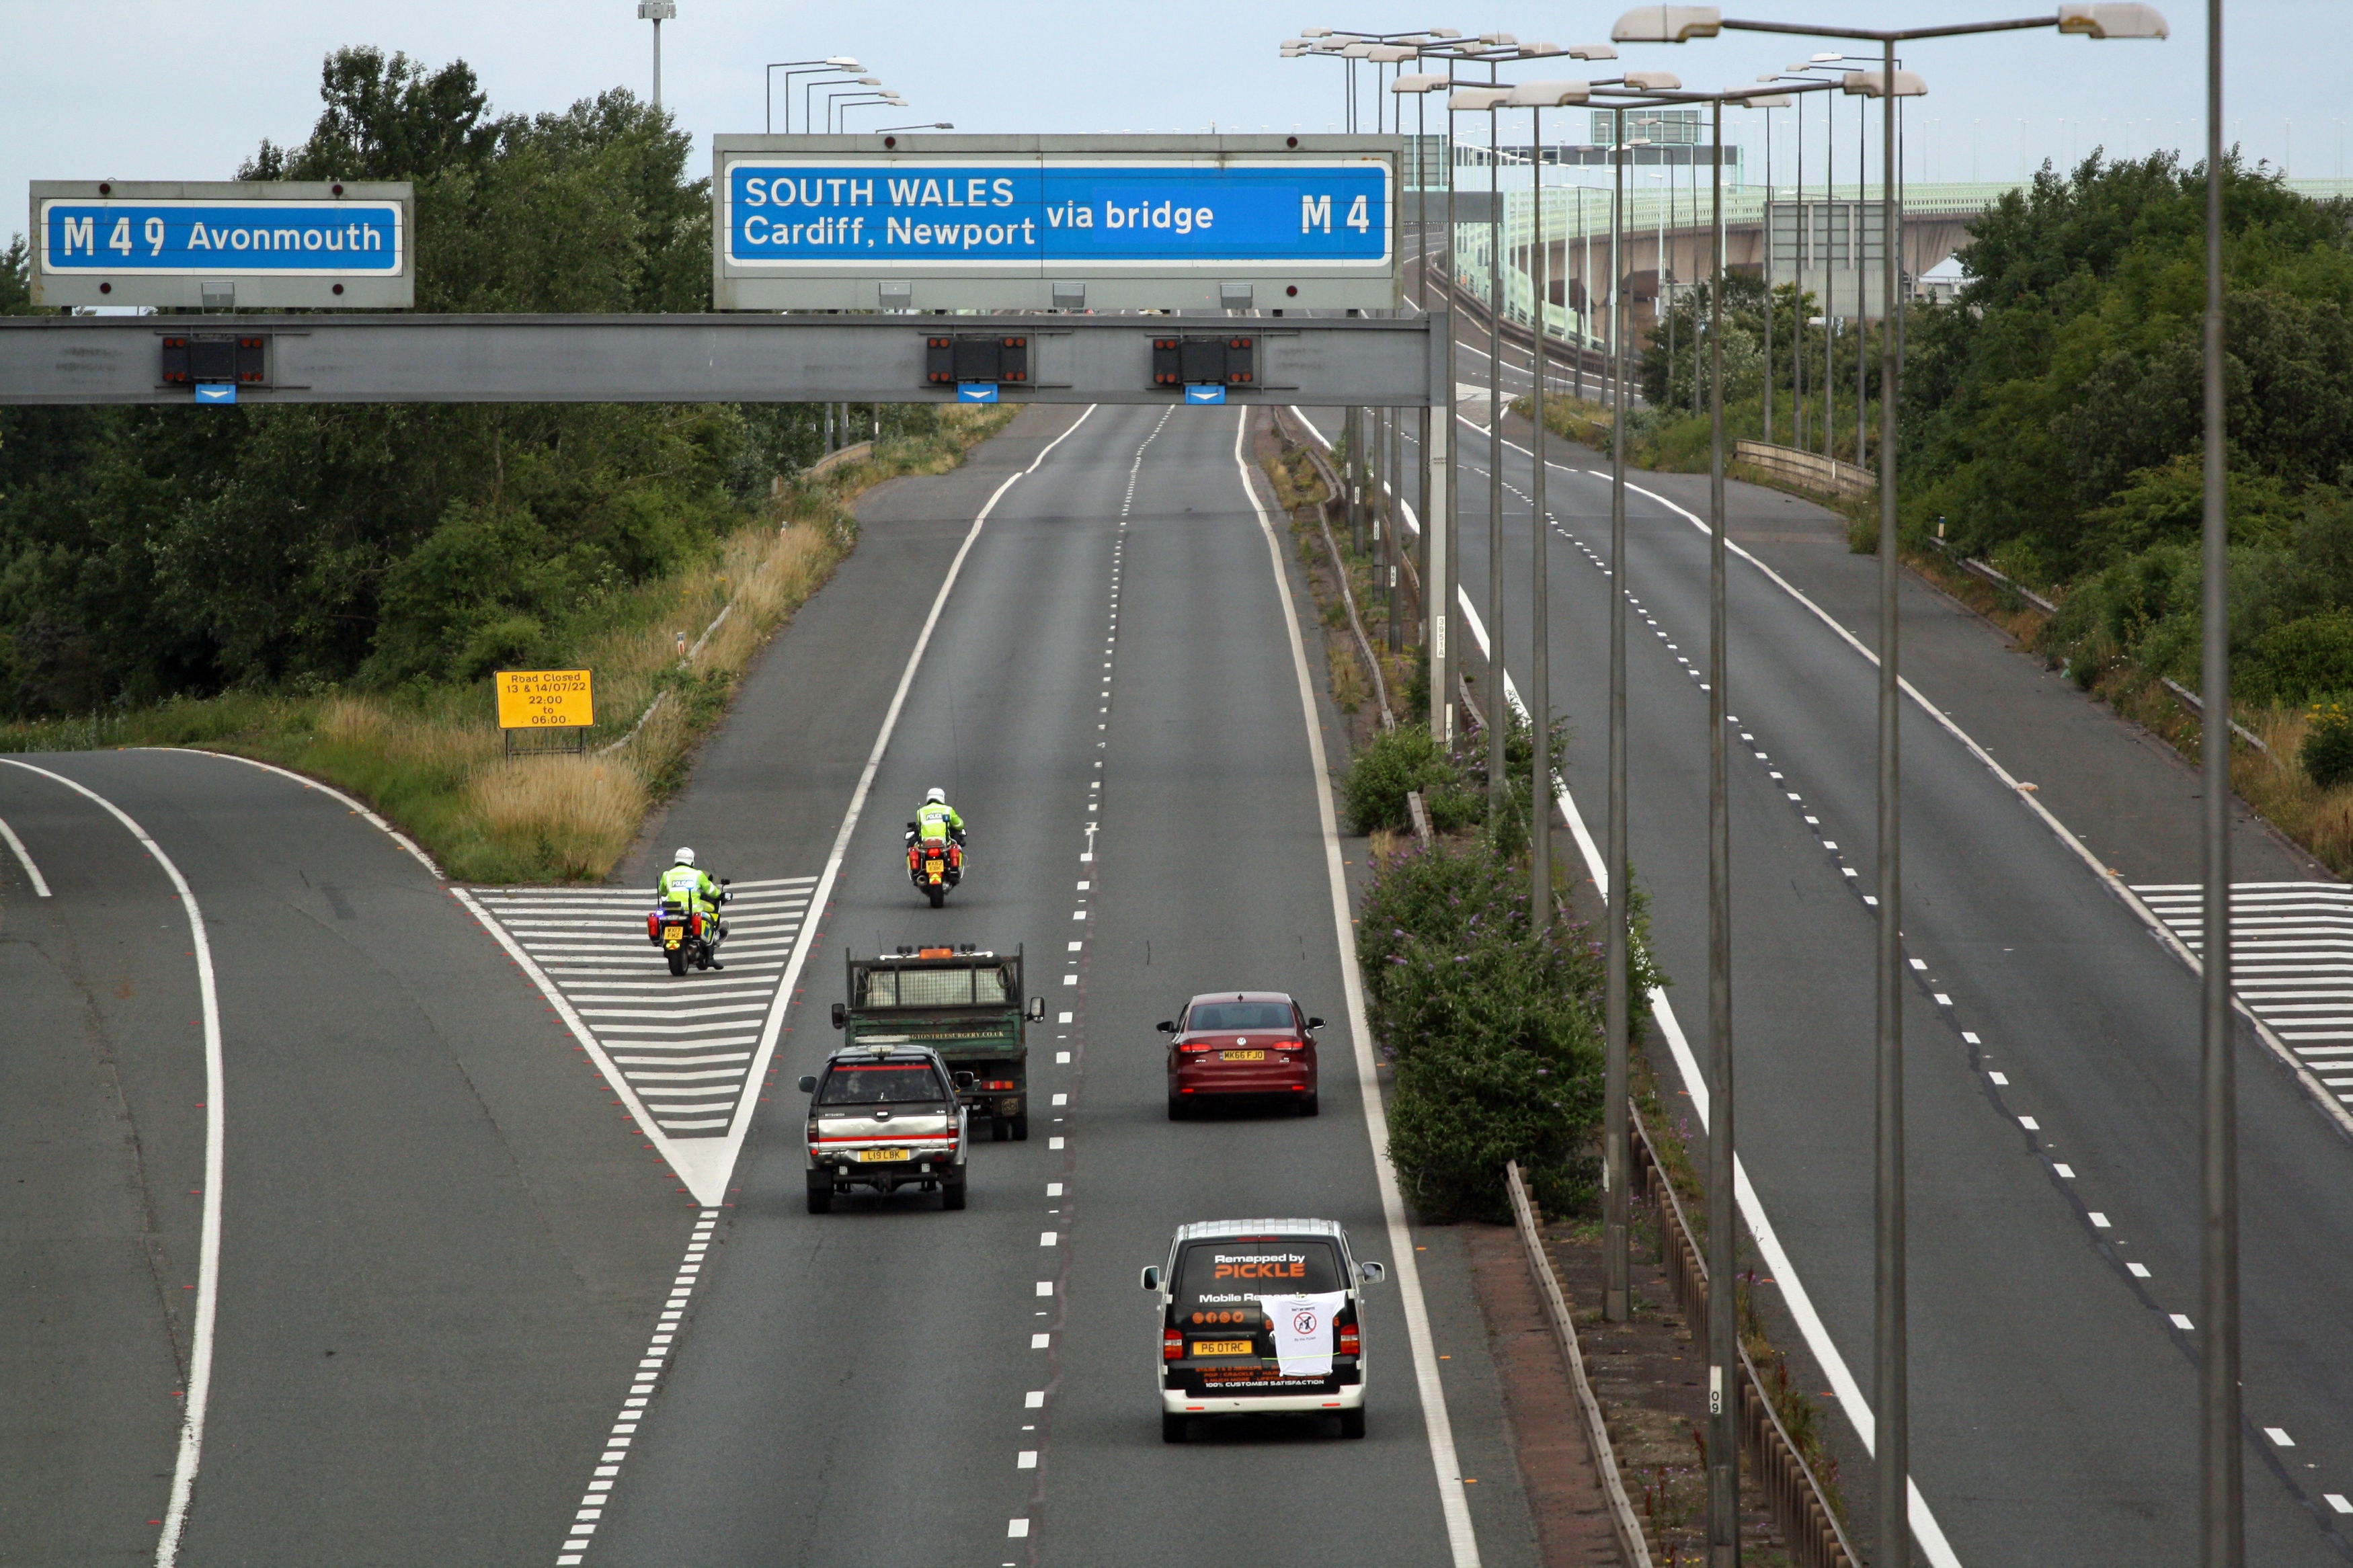 Police escort vehicles along the M4 motorway during the morning rush hour